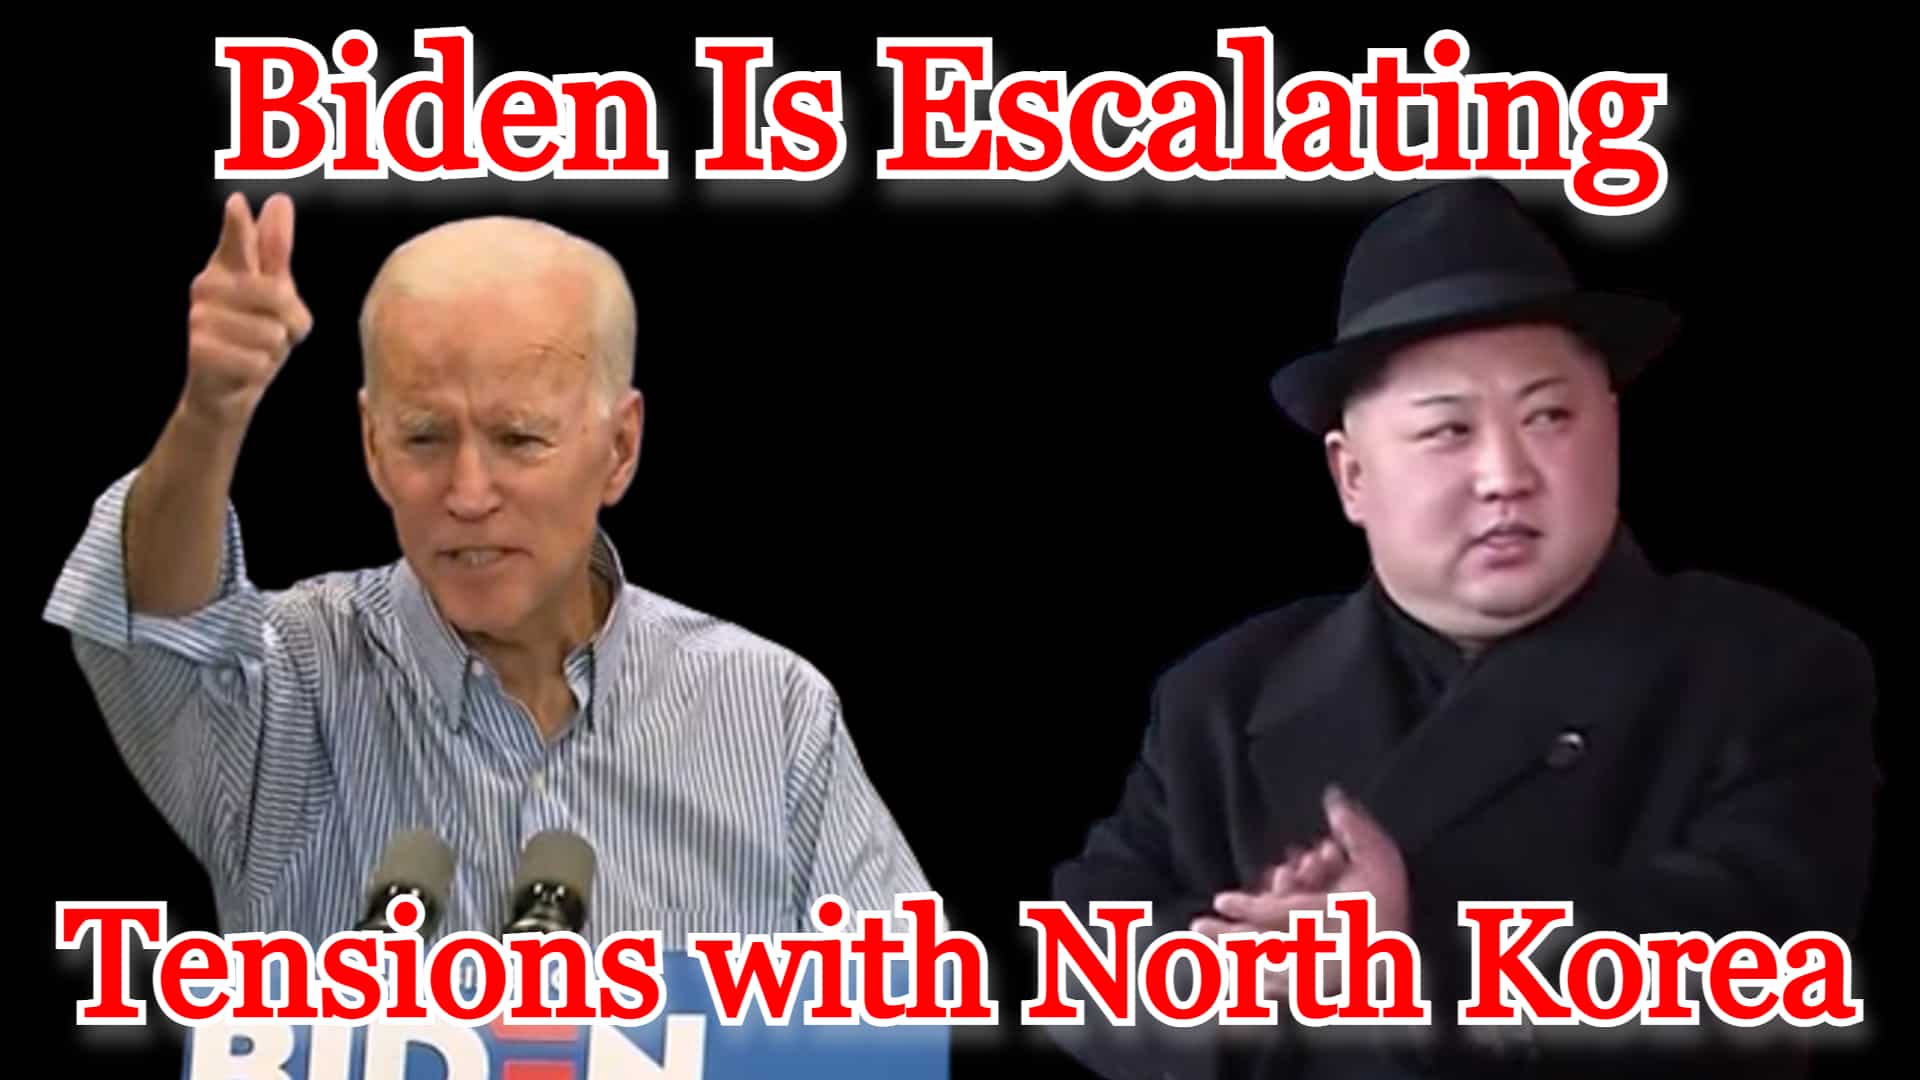 COI #285: Biden Is Escalating Tensions with North Korea